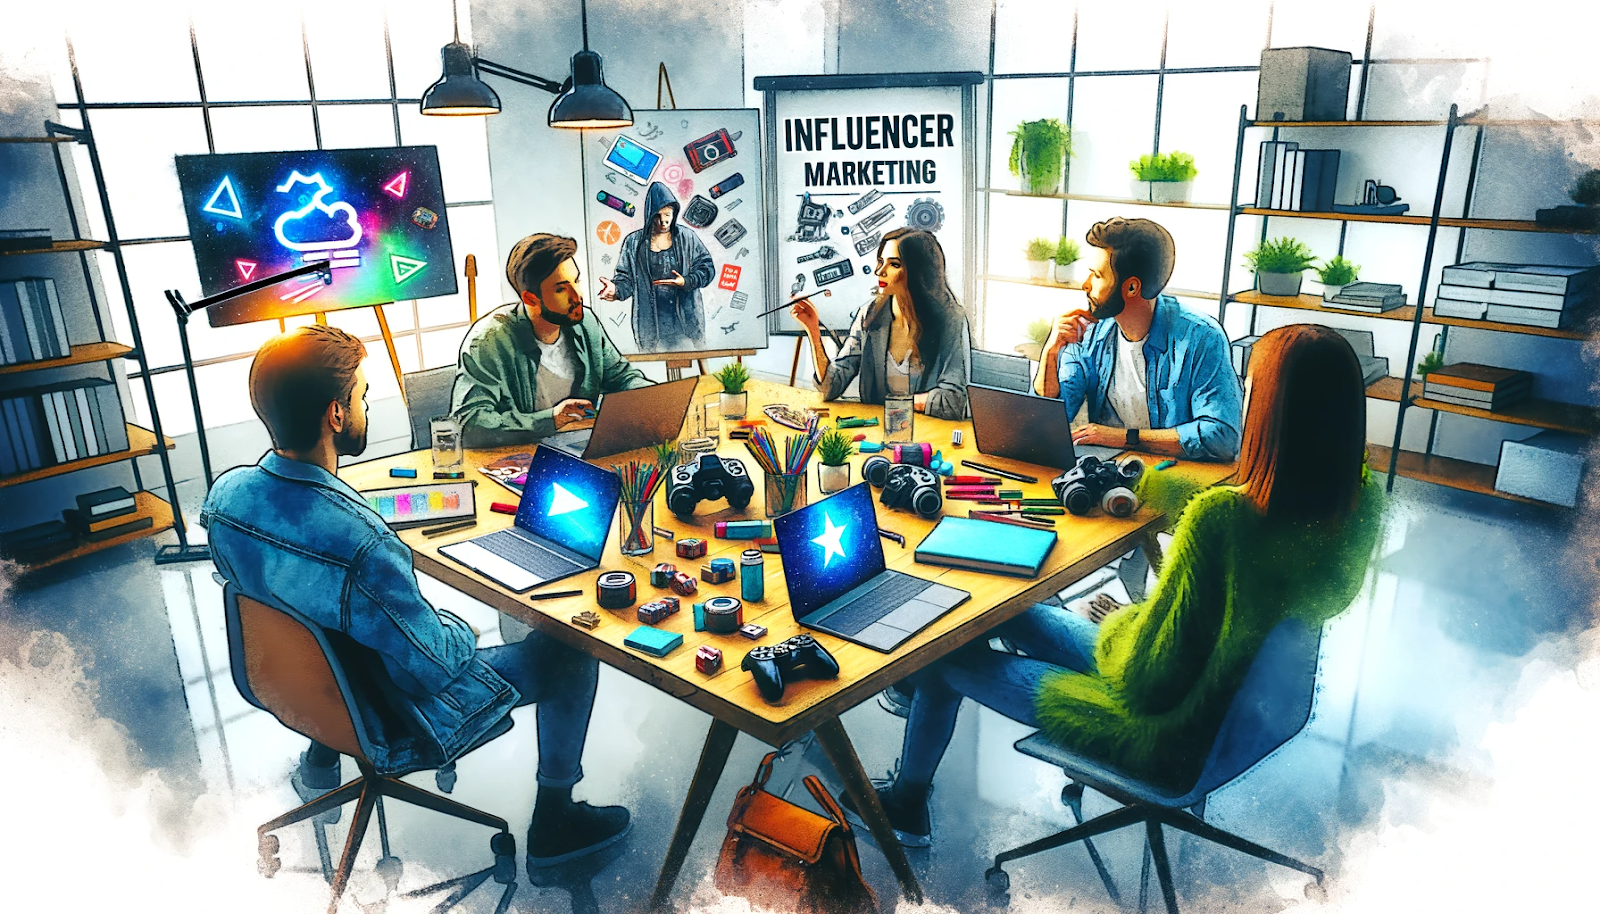 A creative brainstorming session in a modern office, with a team discussing influencer marketing strategies over a table with laptops and gaming merchandise.